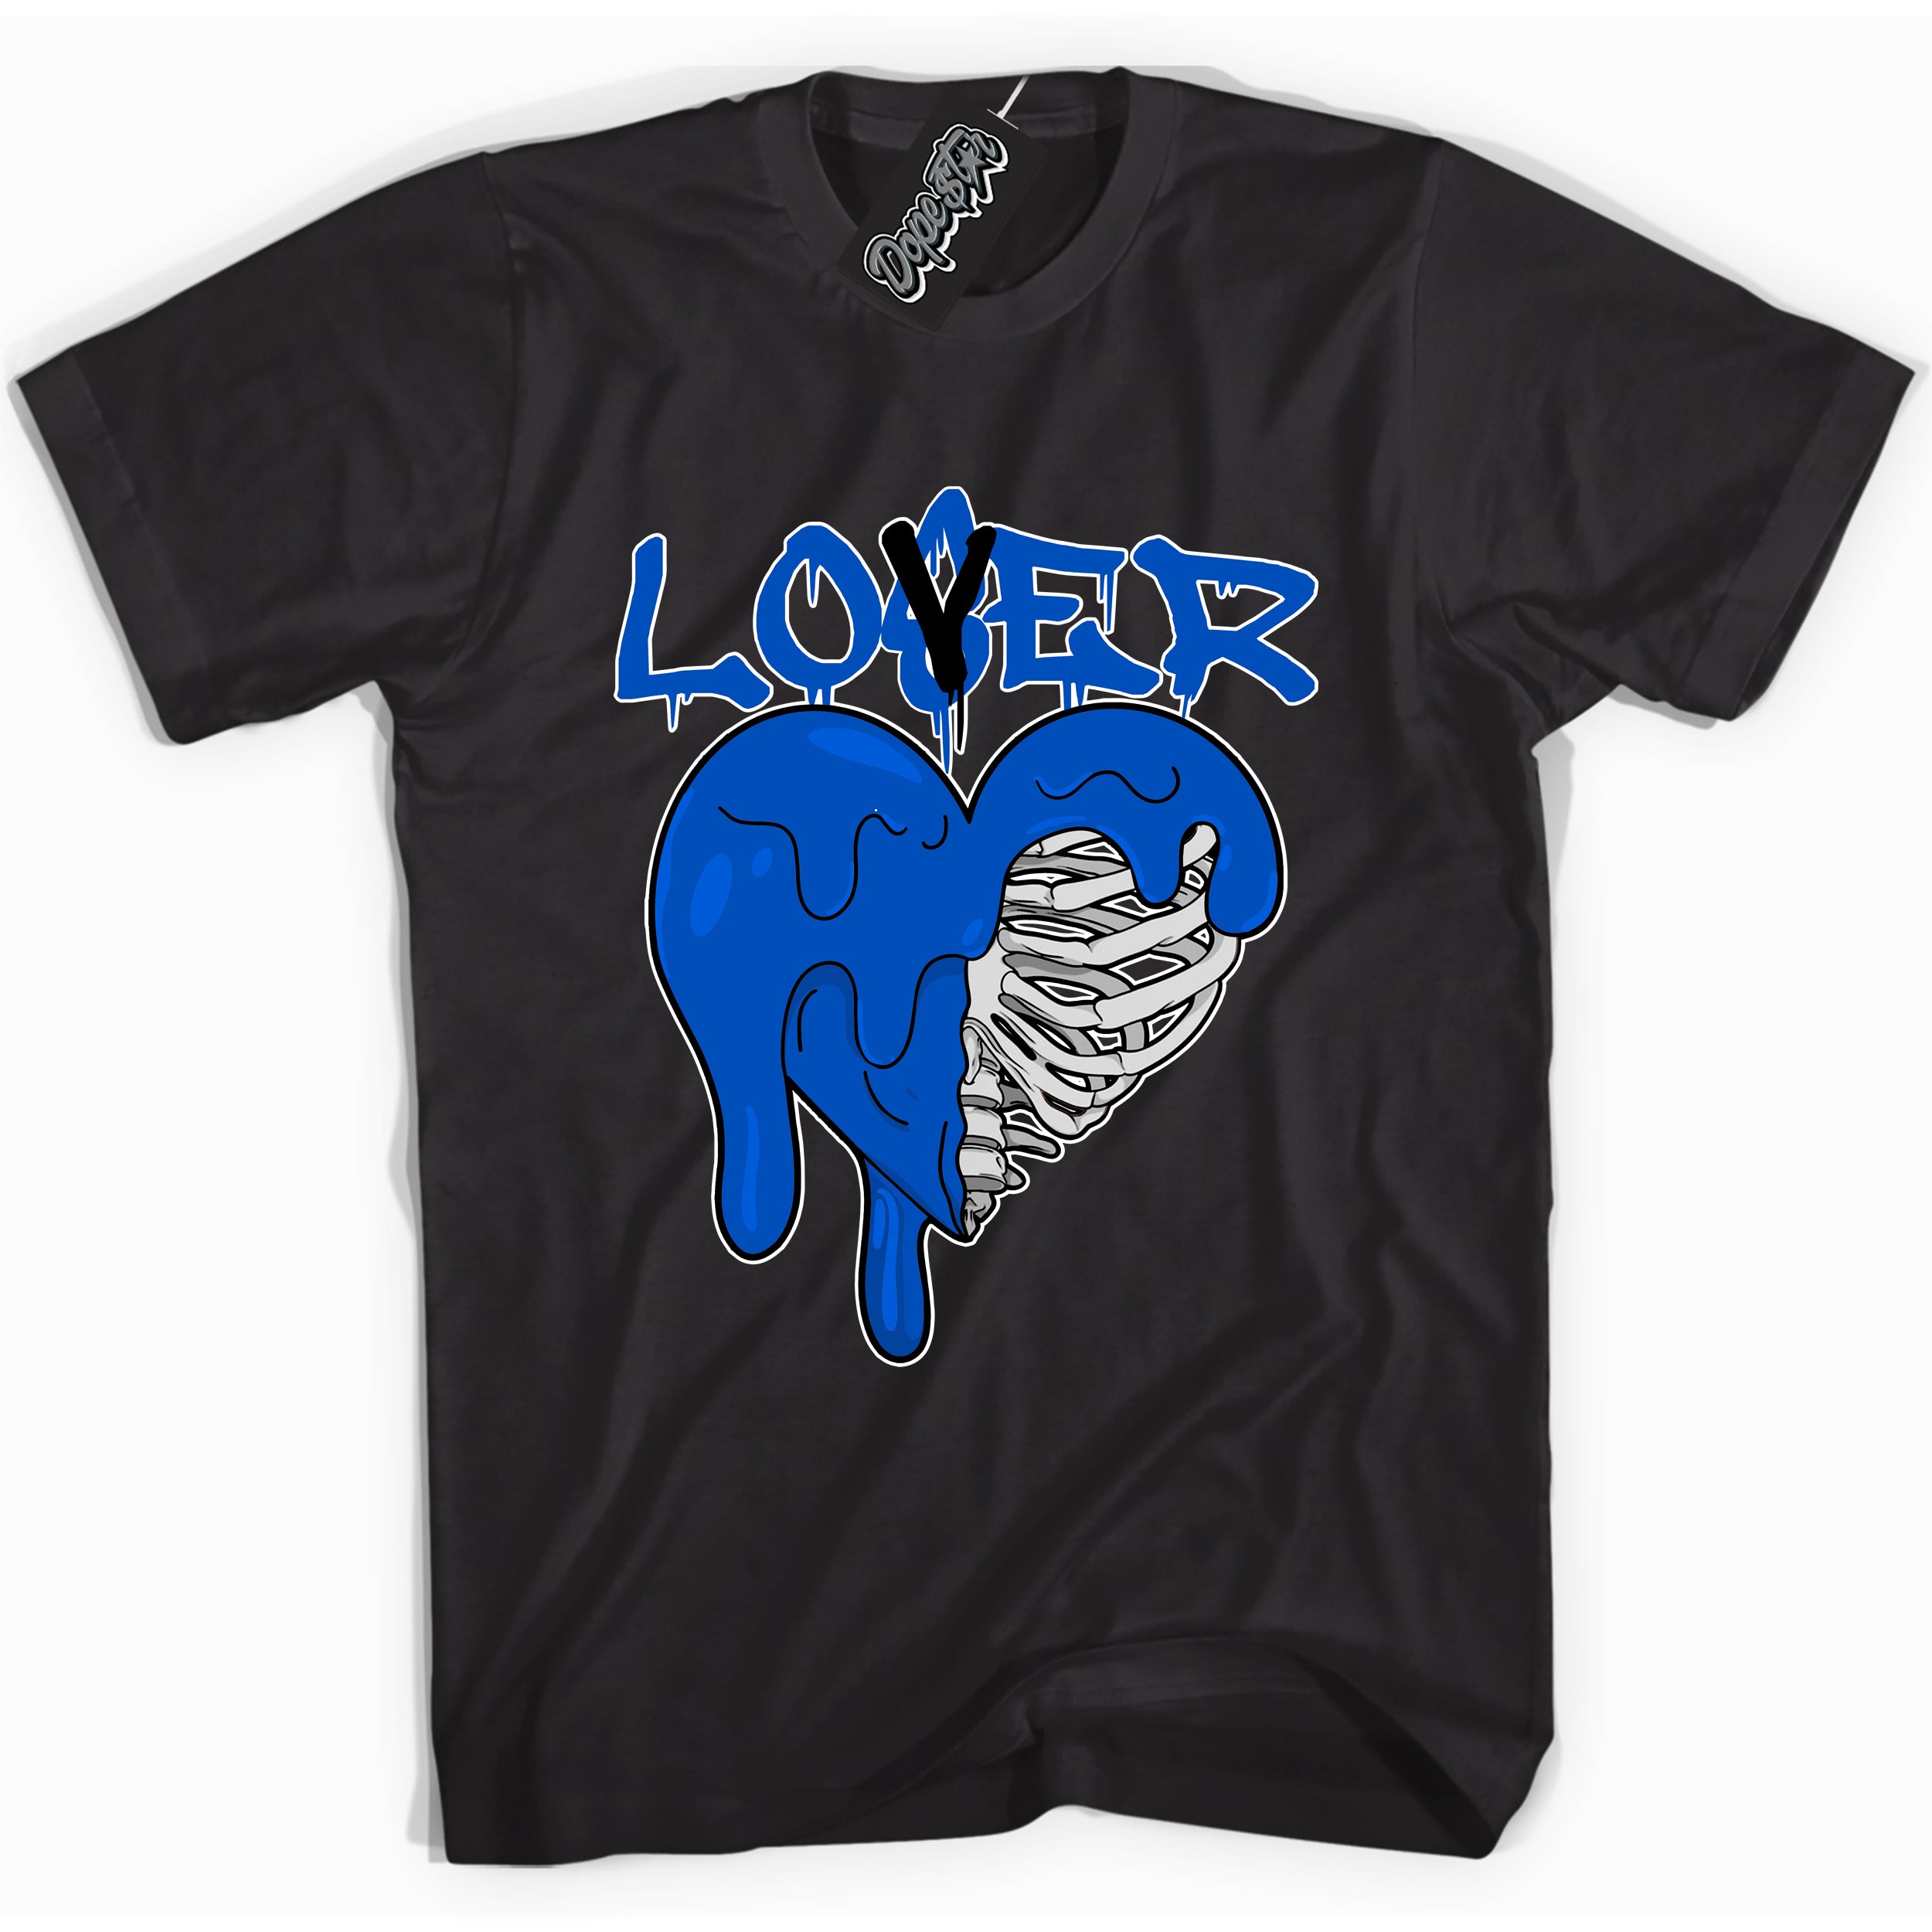 Cool Black graphic tee with "Lover Loser Heart" design, that perfectly matches Royal Reimagined 1s sneakers 